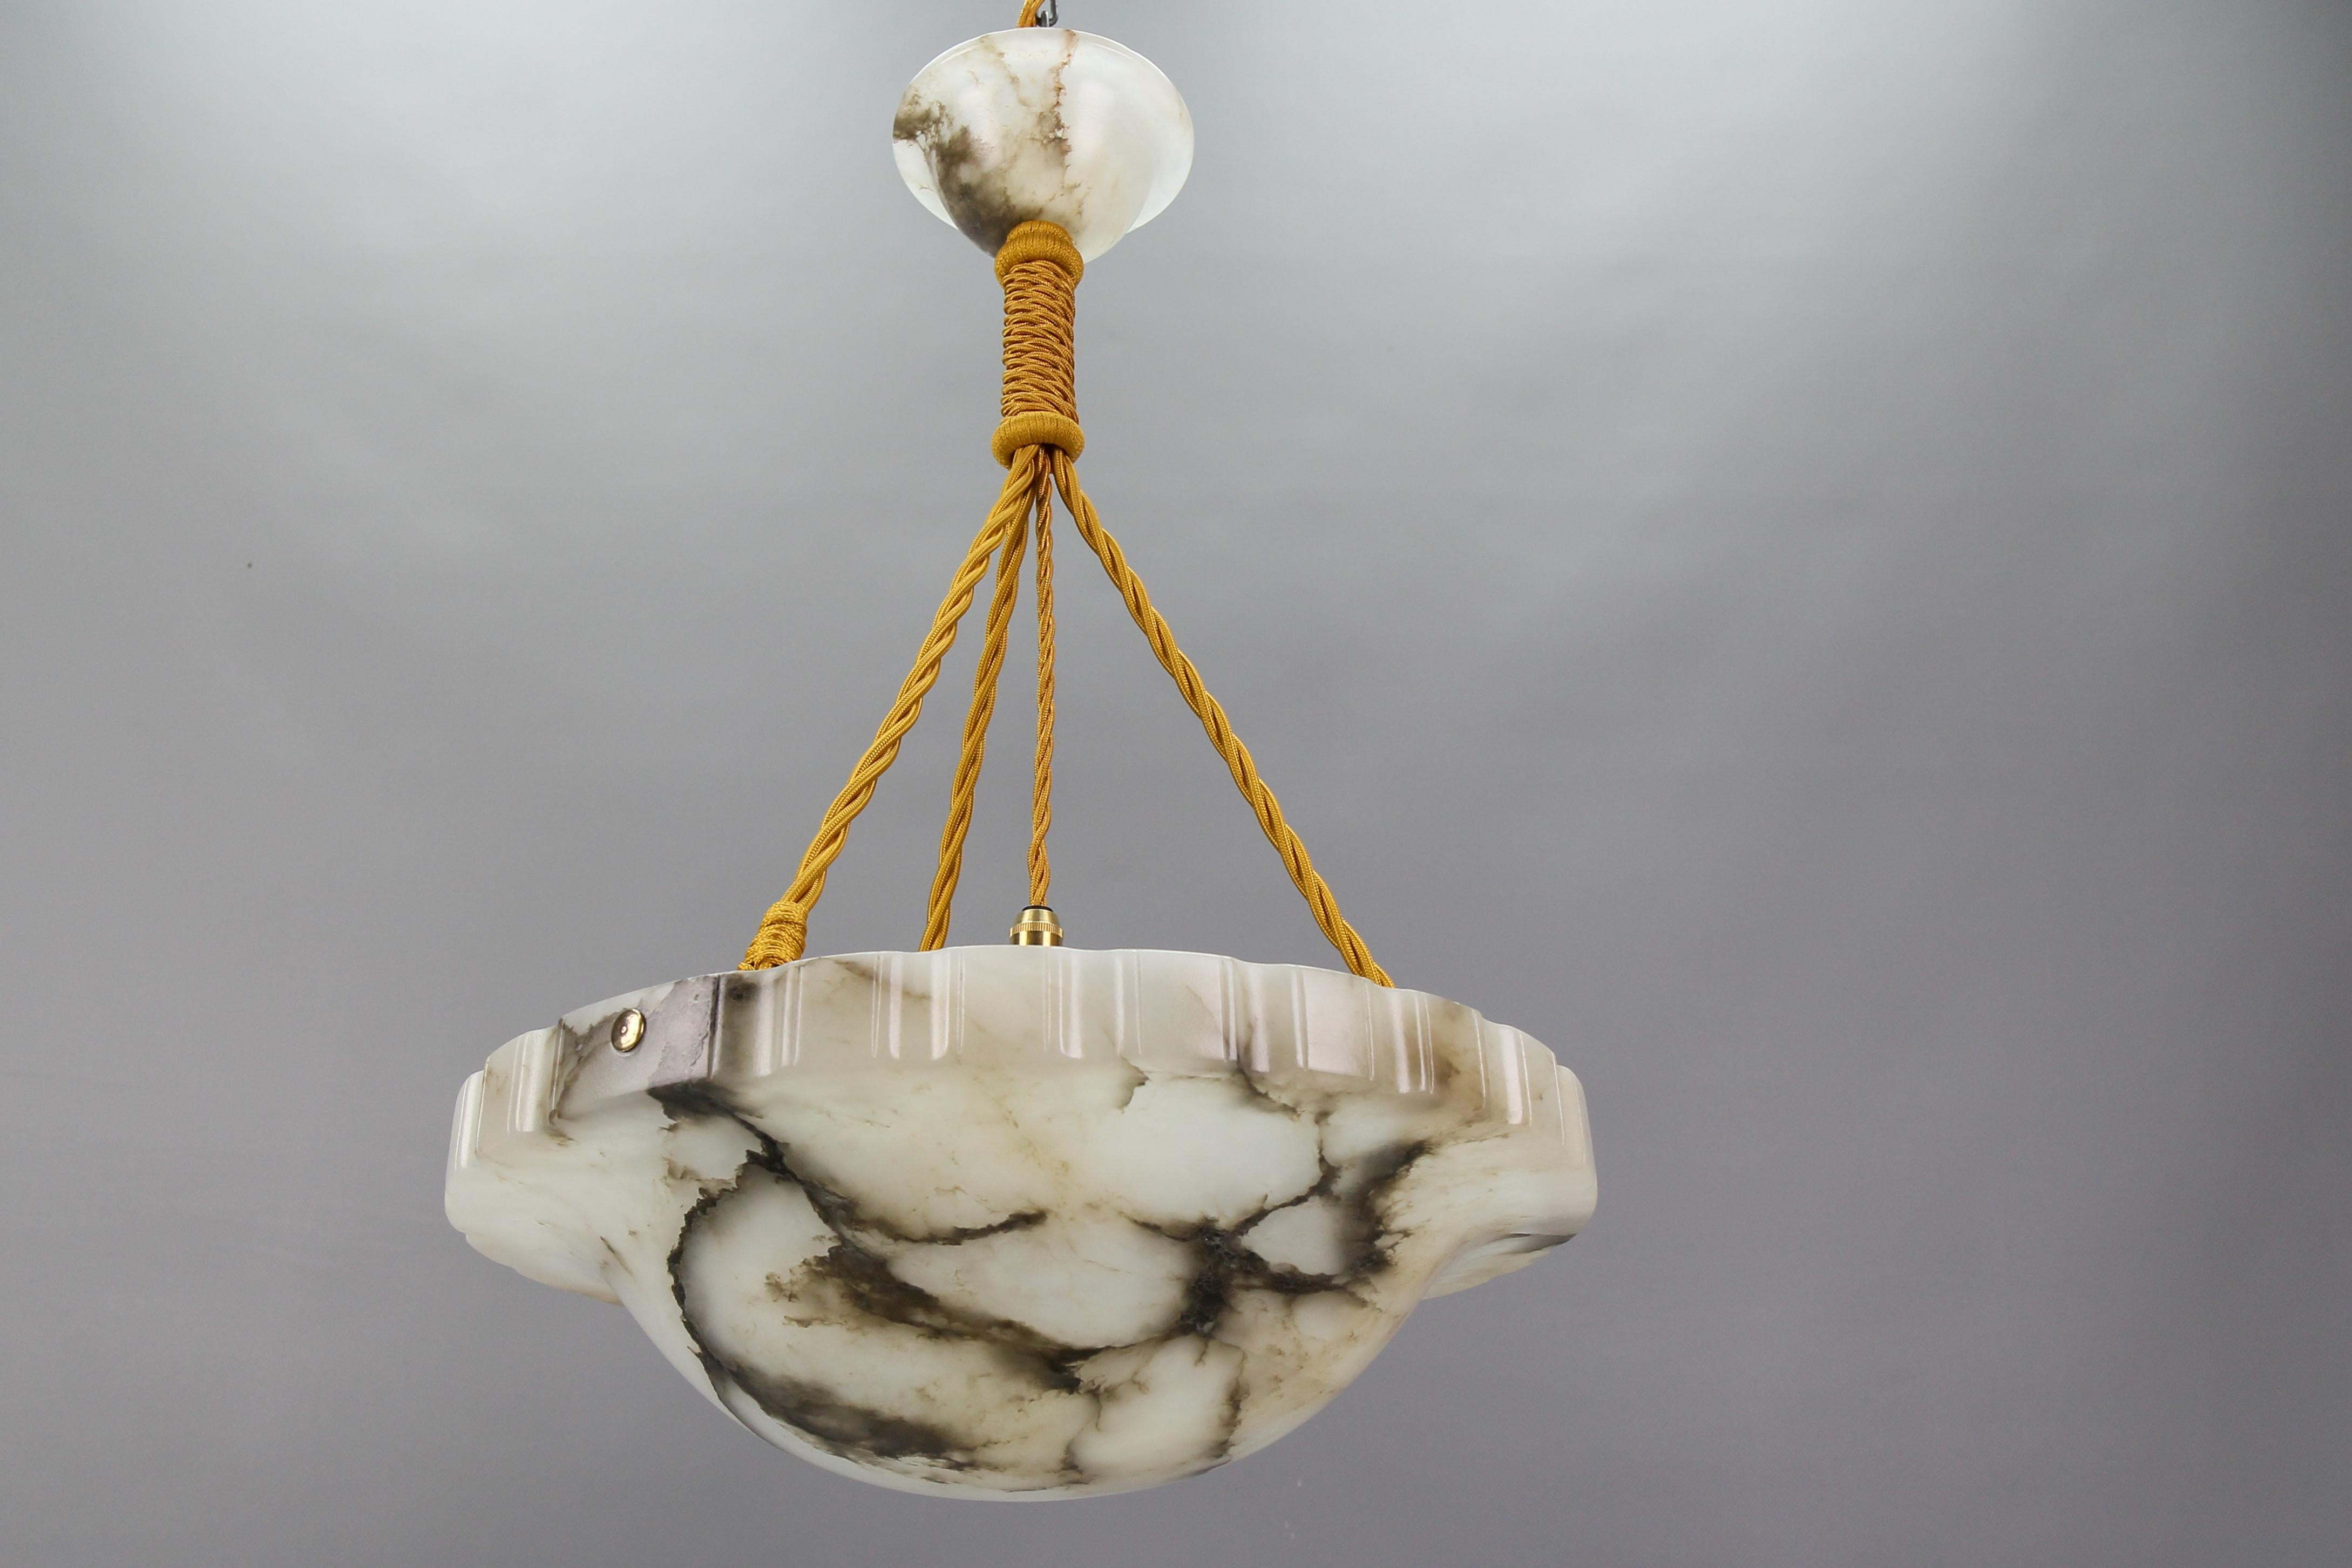 Art Deco white and grey alabaster pendant light fixture with black veines, France, circa the 1920s.
An impressive and wonderfully shaped alabaster pendant ceiling light fixture from circa the 1920s. Beautifully veined and masterfully carved white